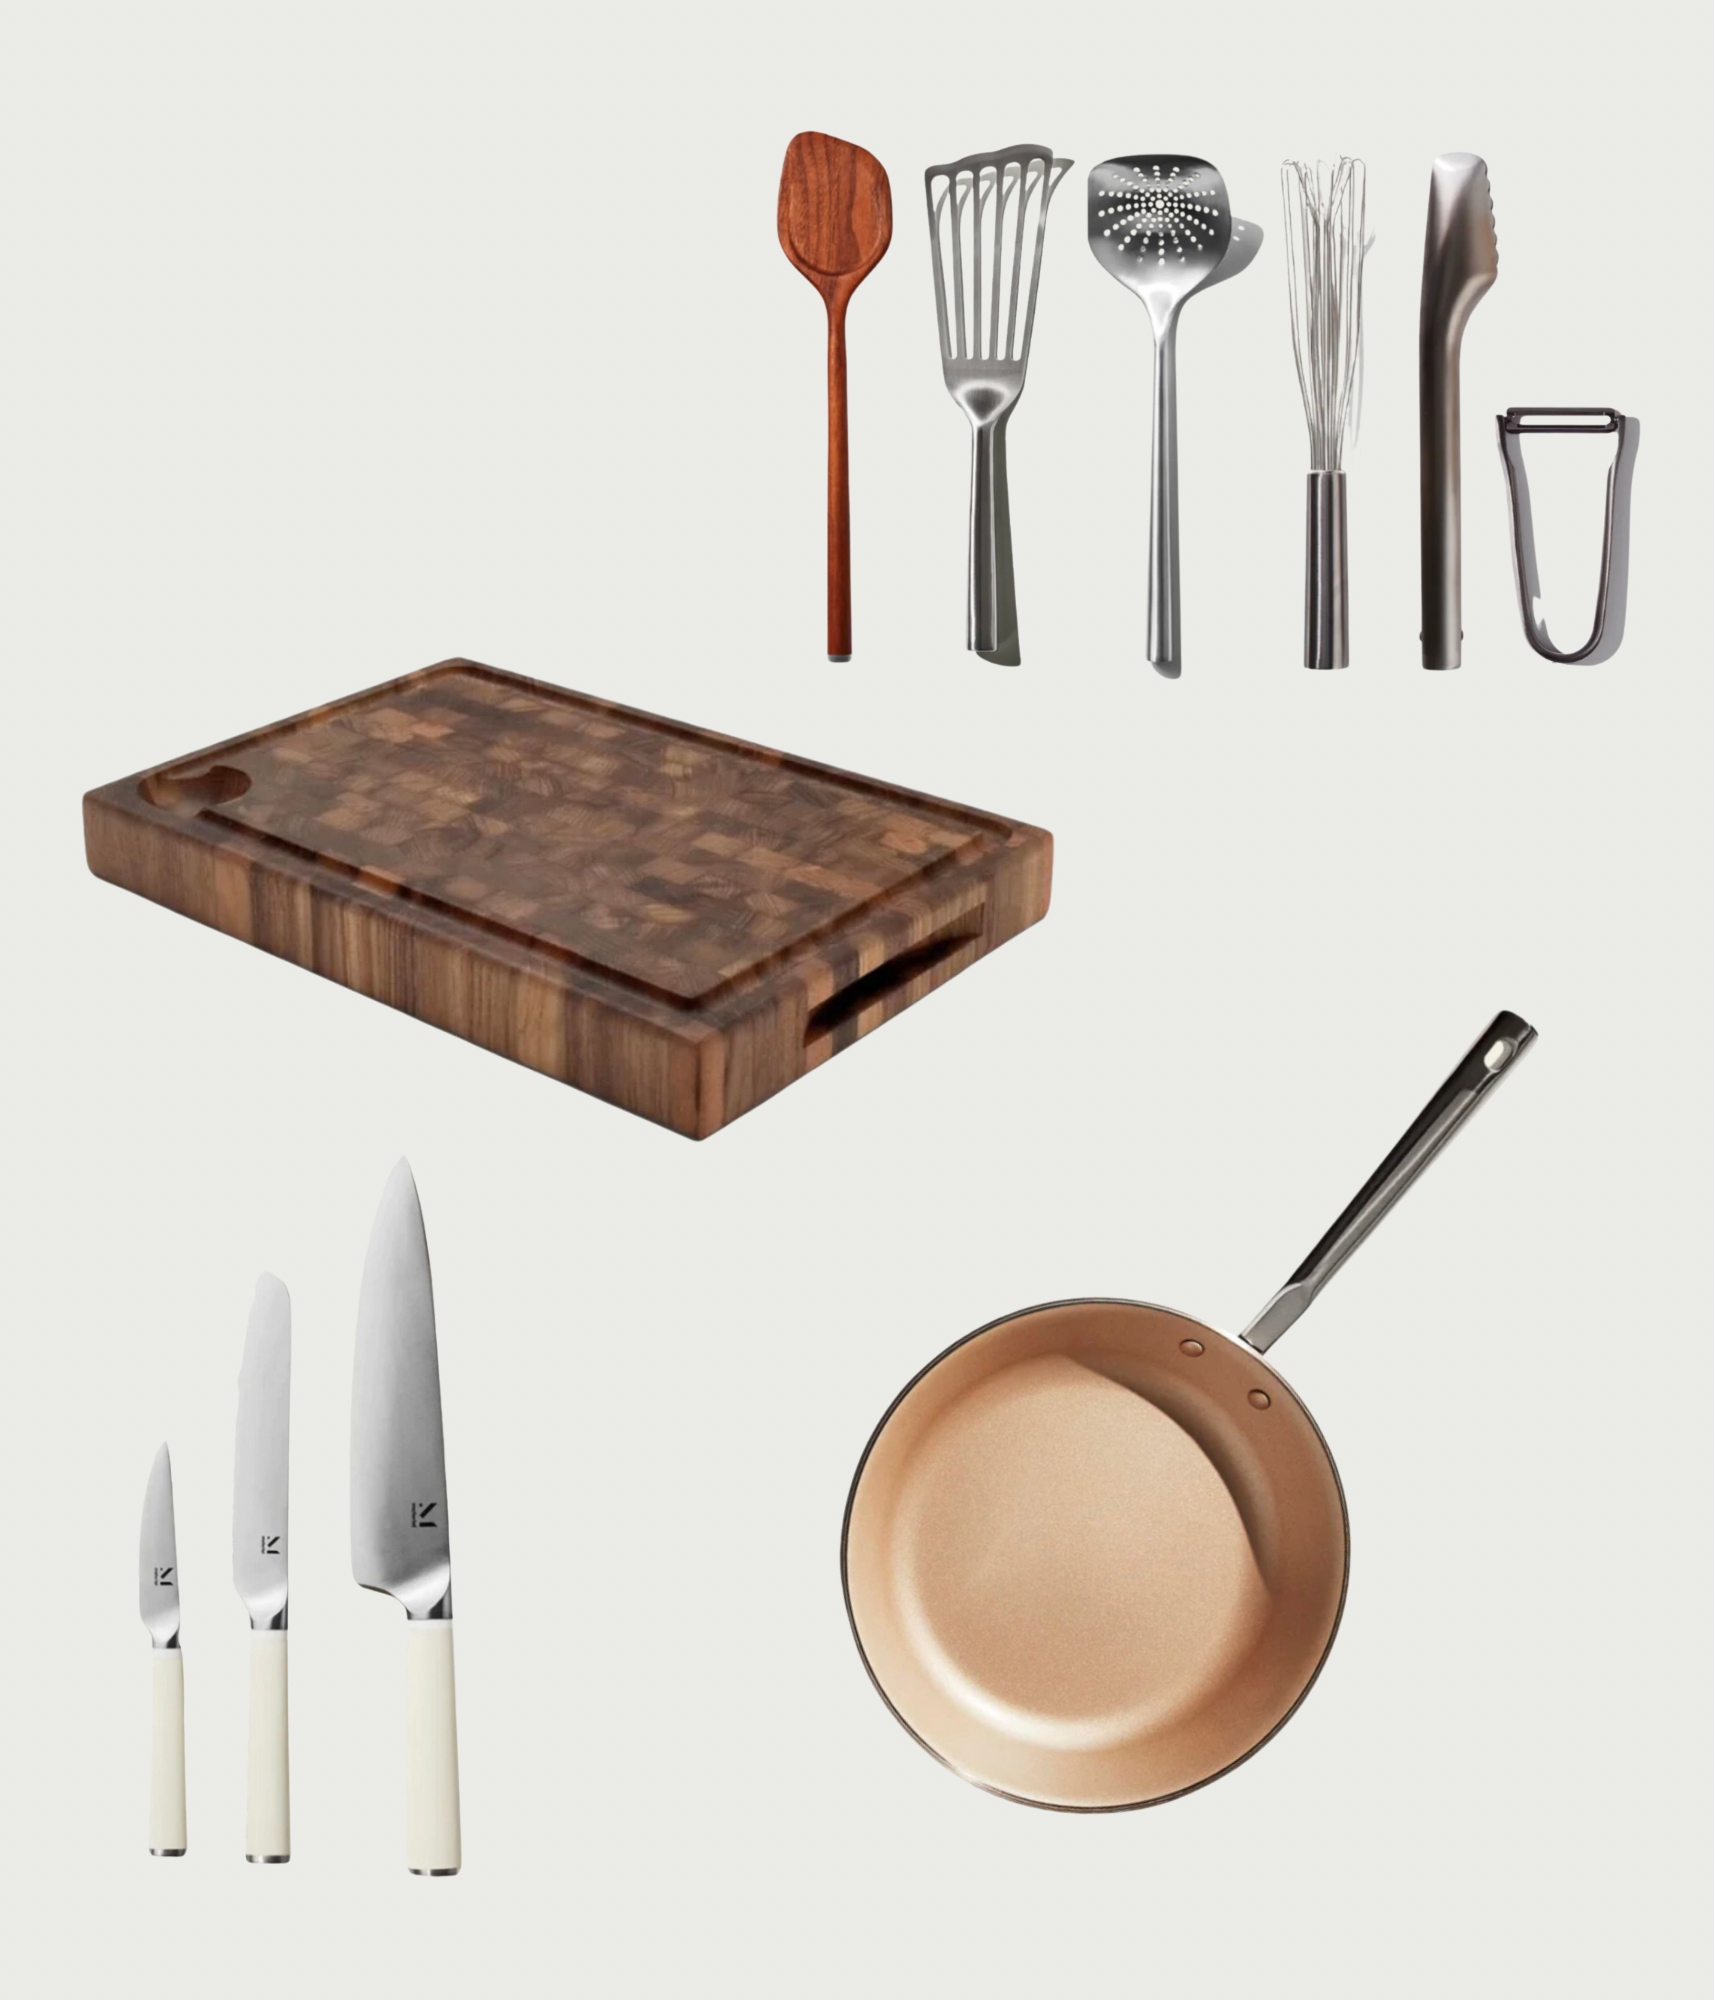 The Ultimate Culinary Set images